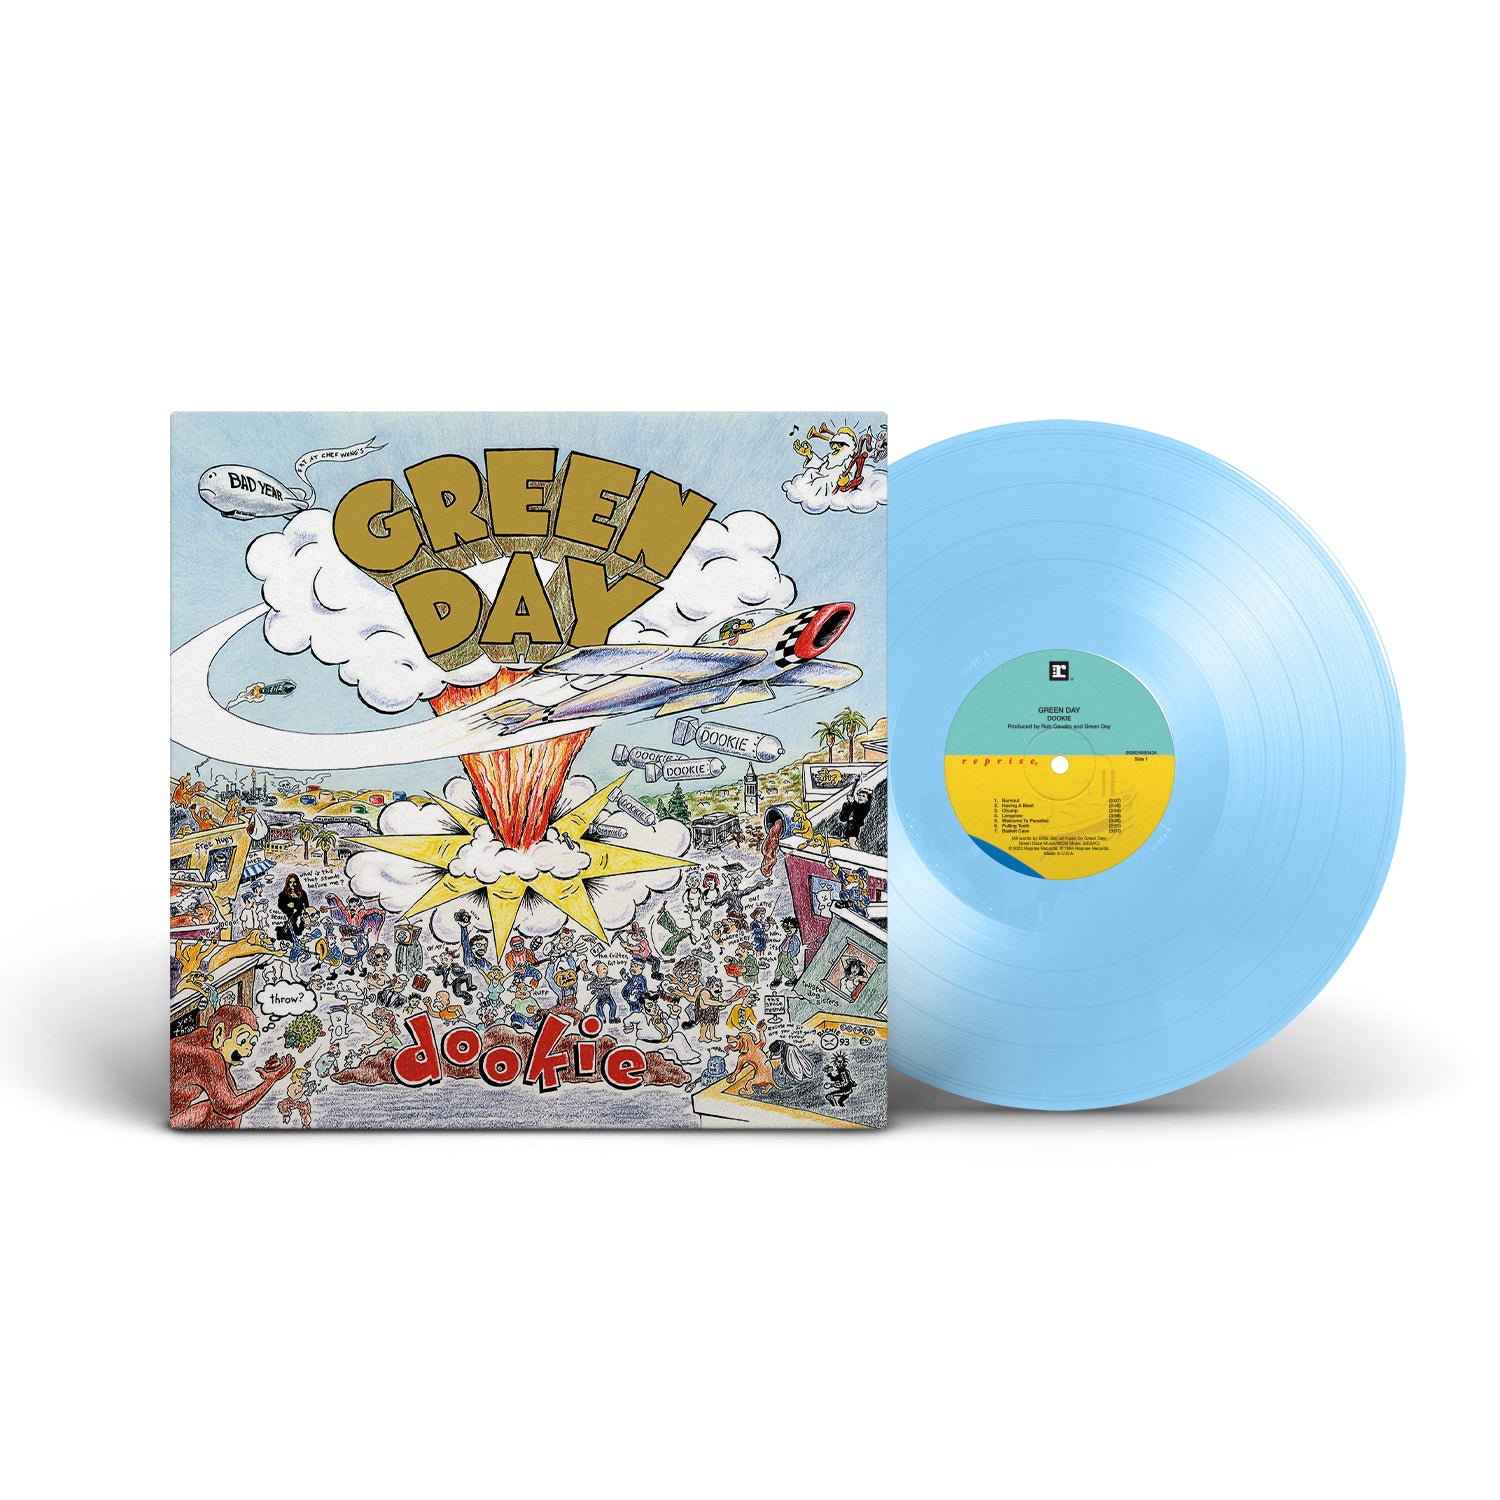 Green Day - Dookie (30th Anniversary): Limited Baby Blue Vinyl LP